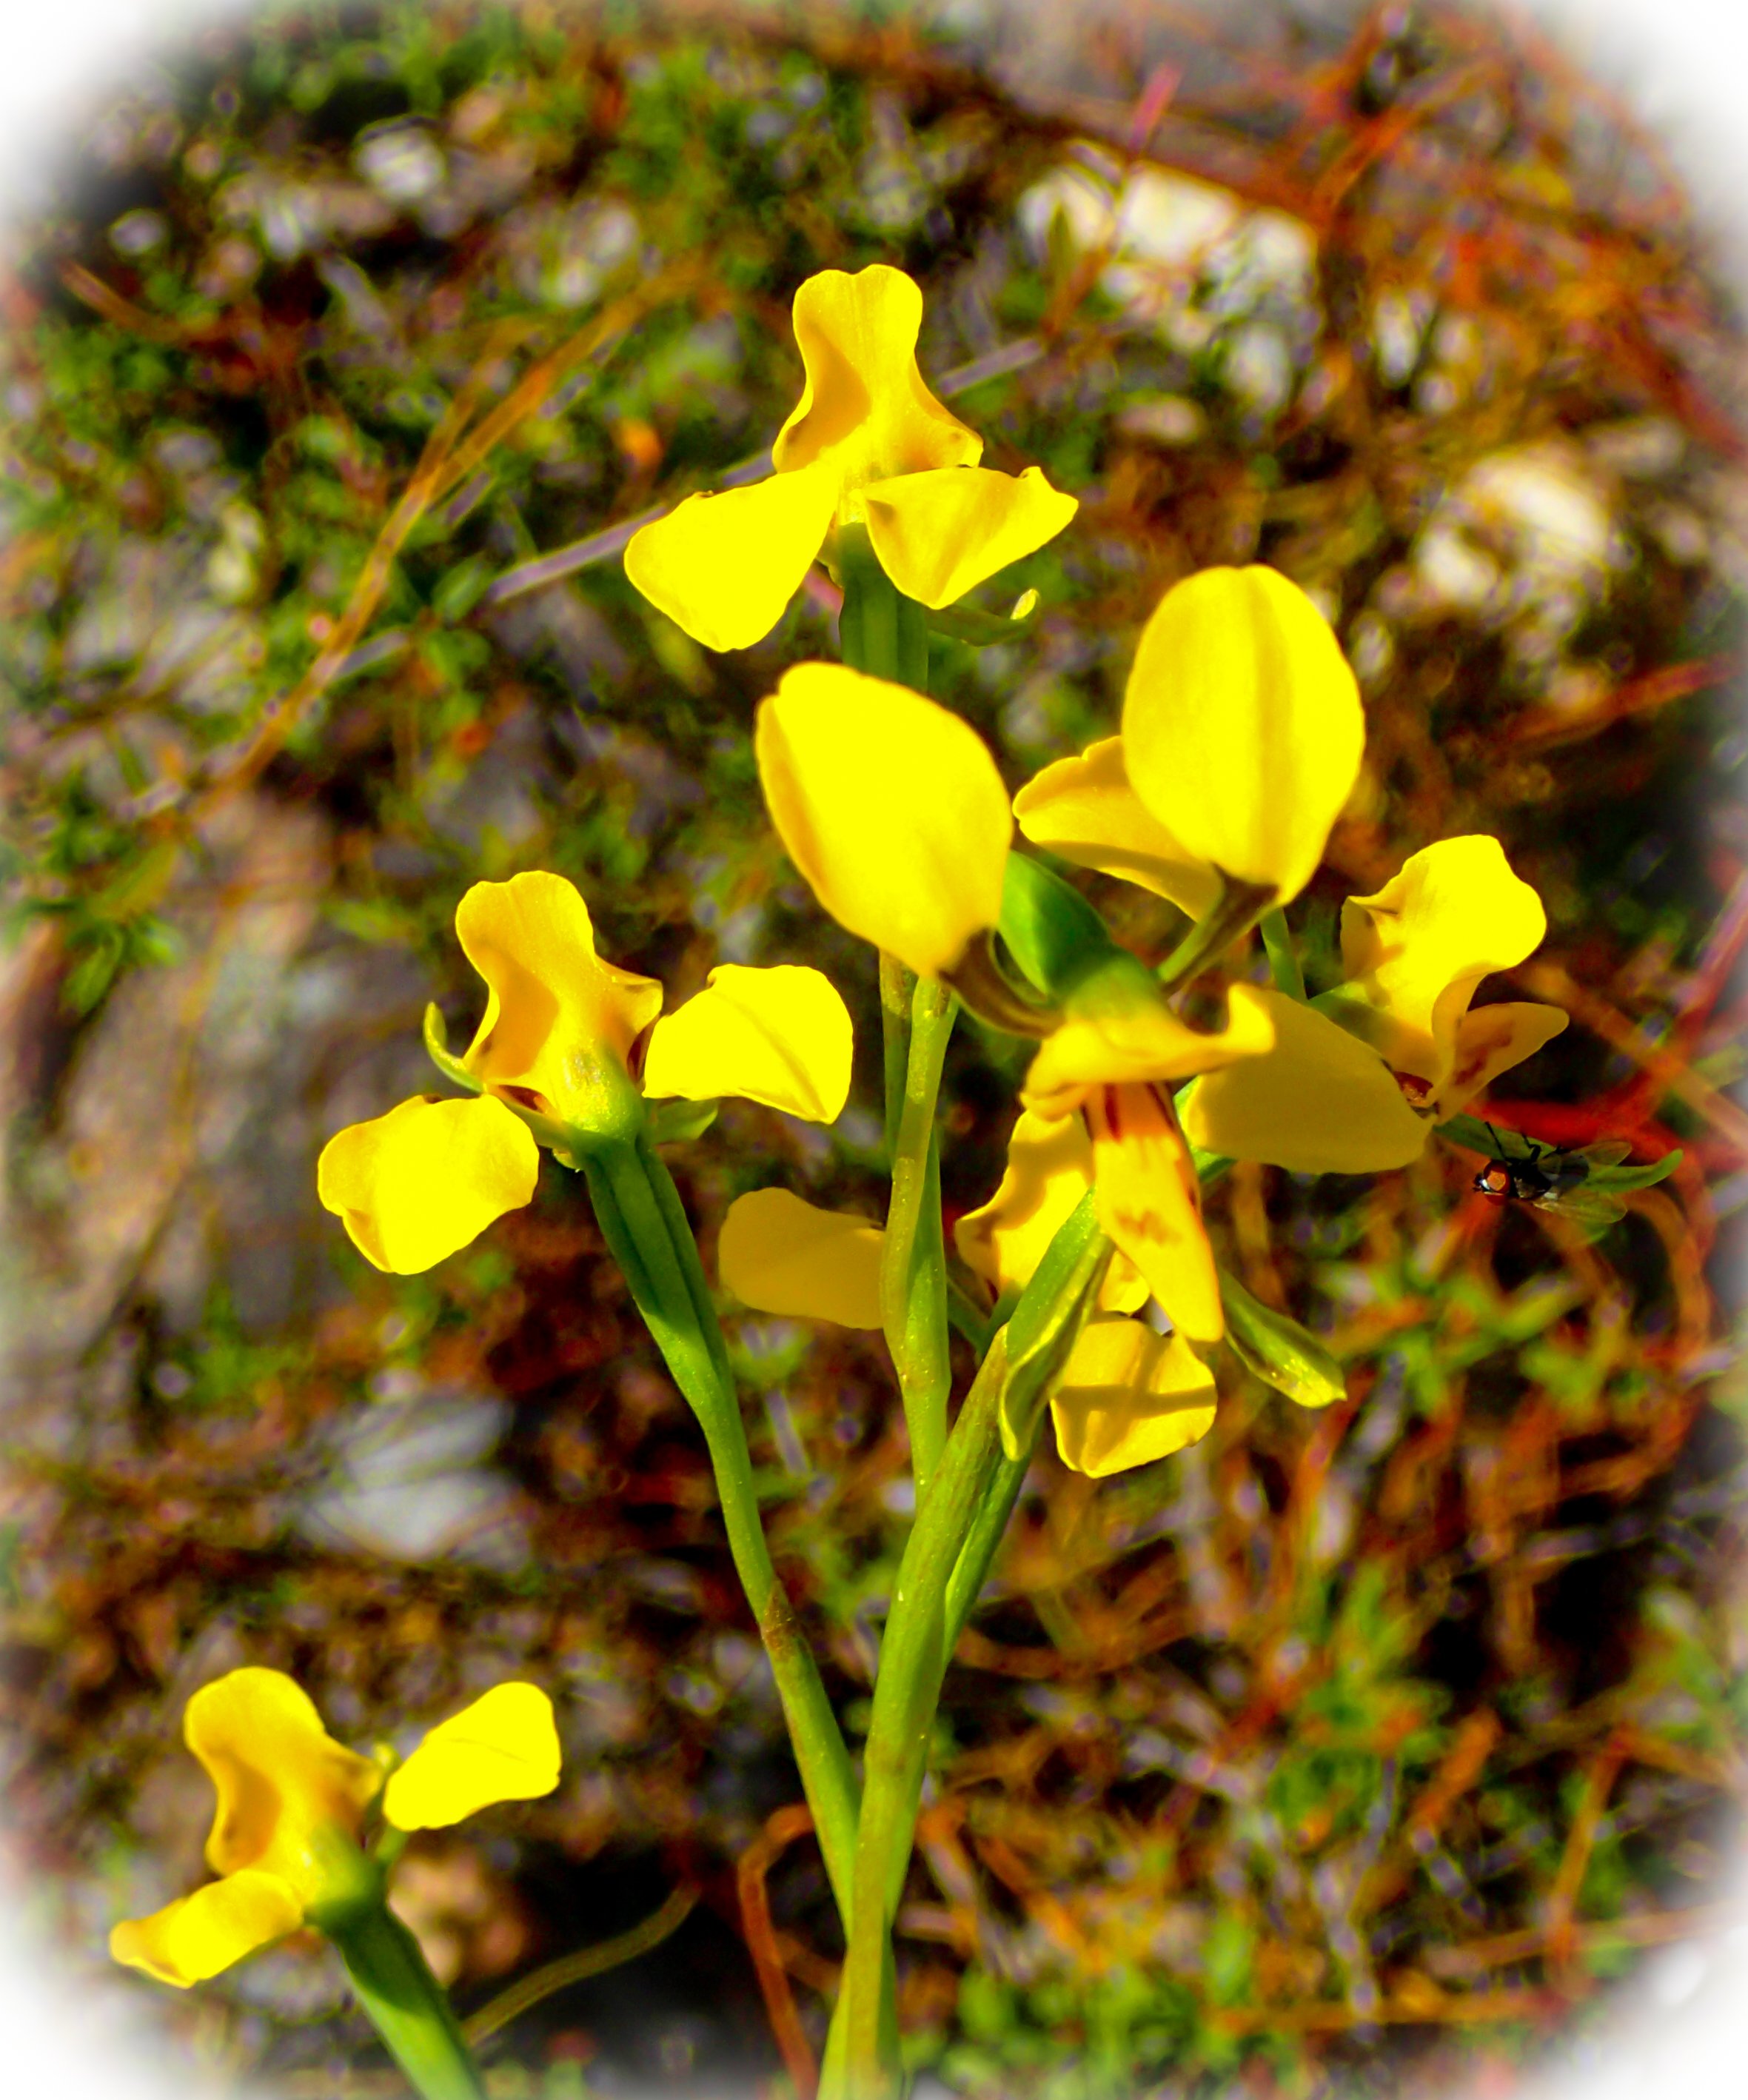 Diuris sp/Donkey Orchid